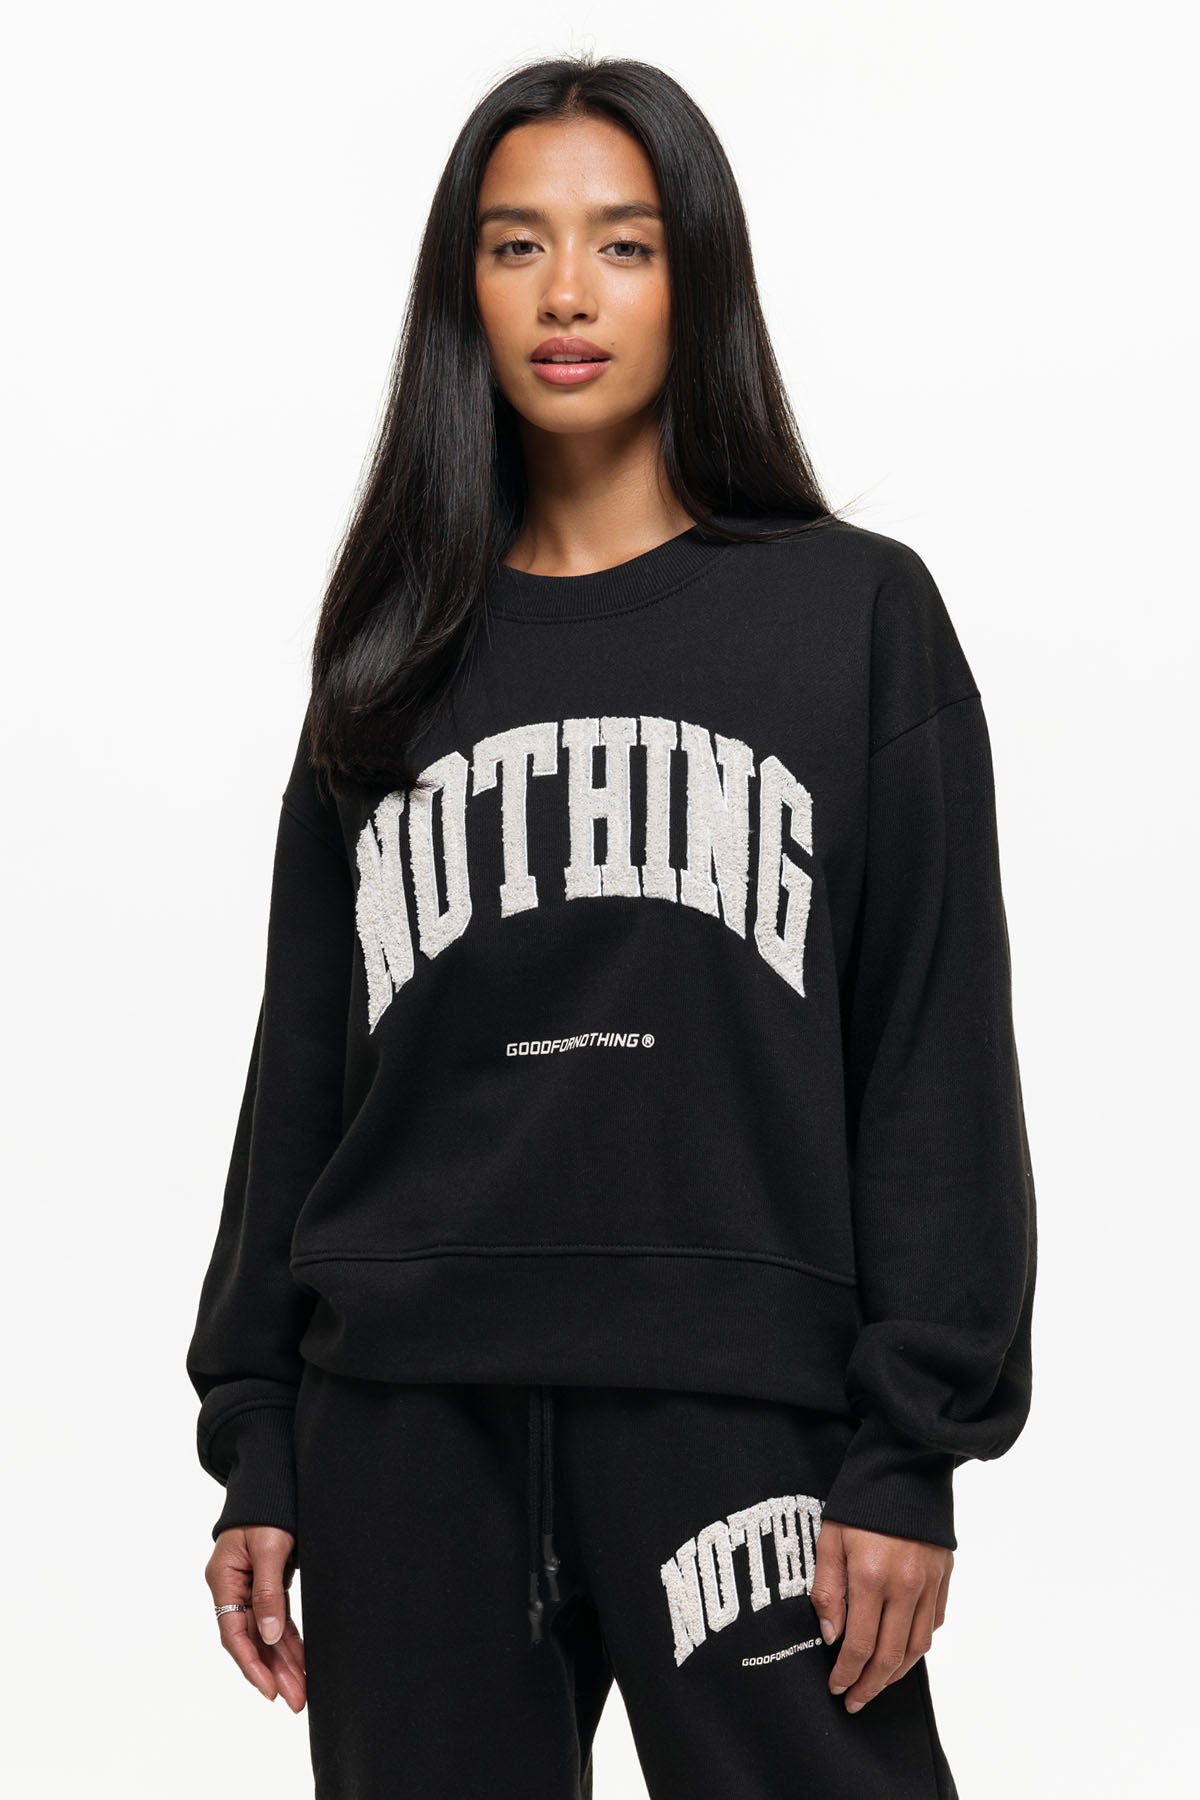 WOMEN'S TRACKSUITS – GOODFORNOTHING®